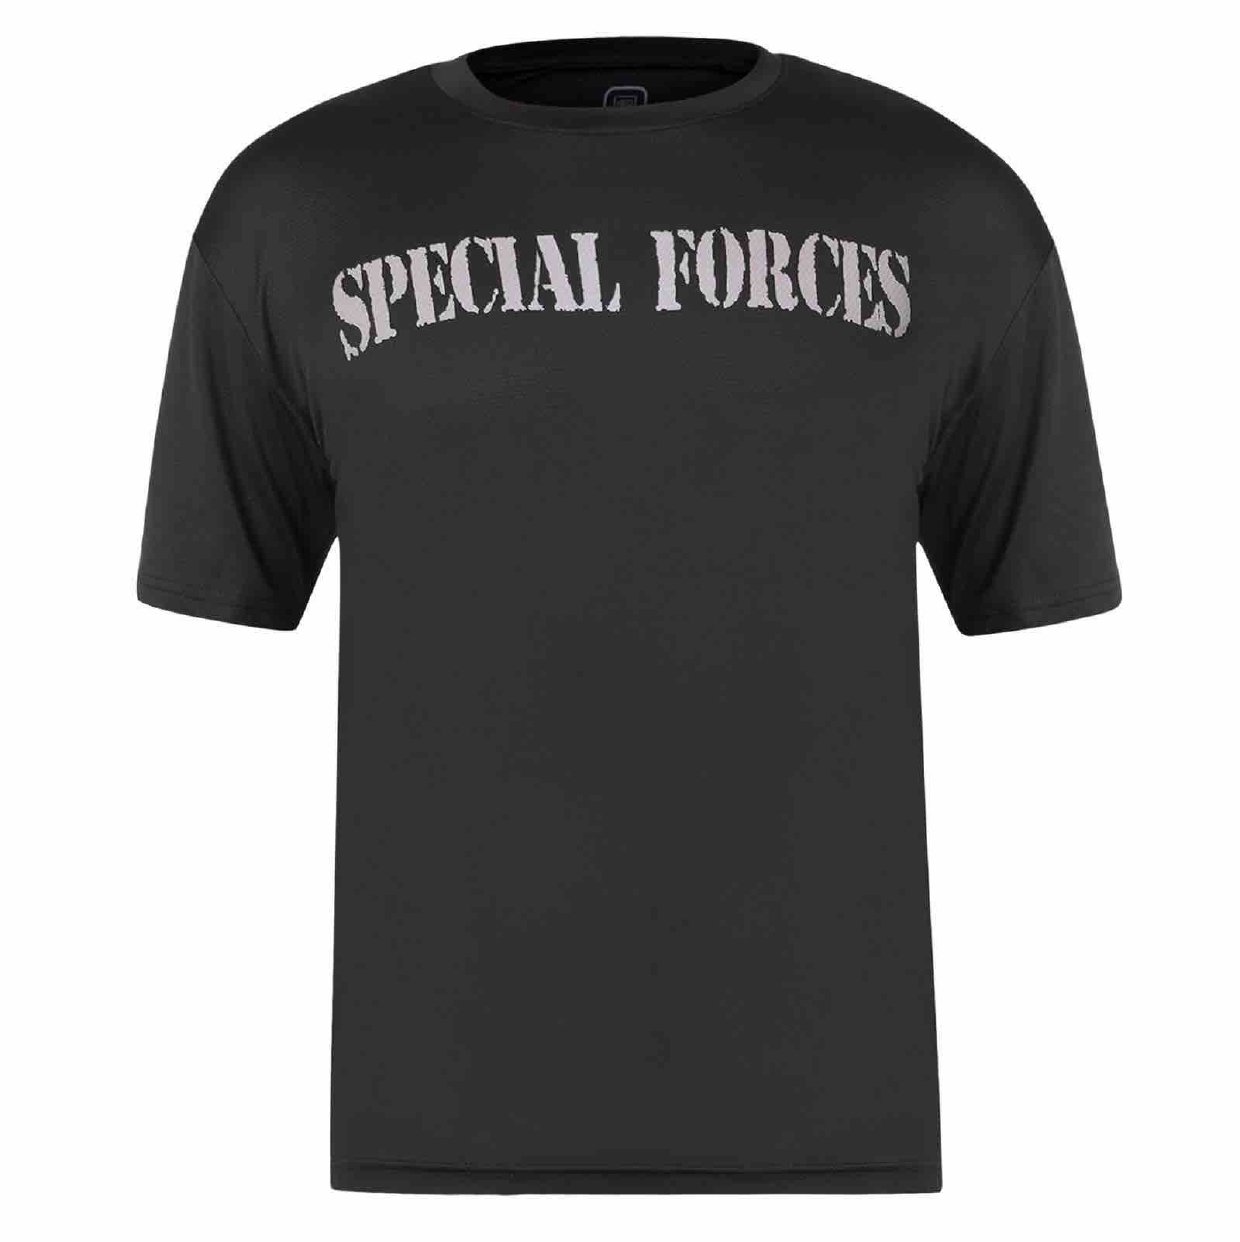 SPECIAL FORCES BLACK T SHIRT